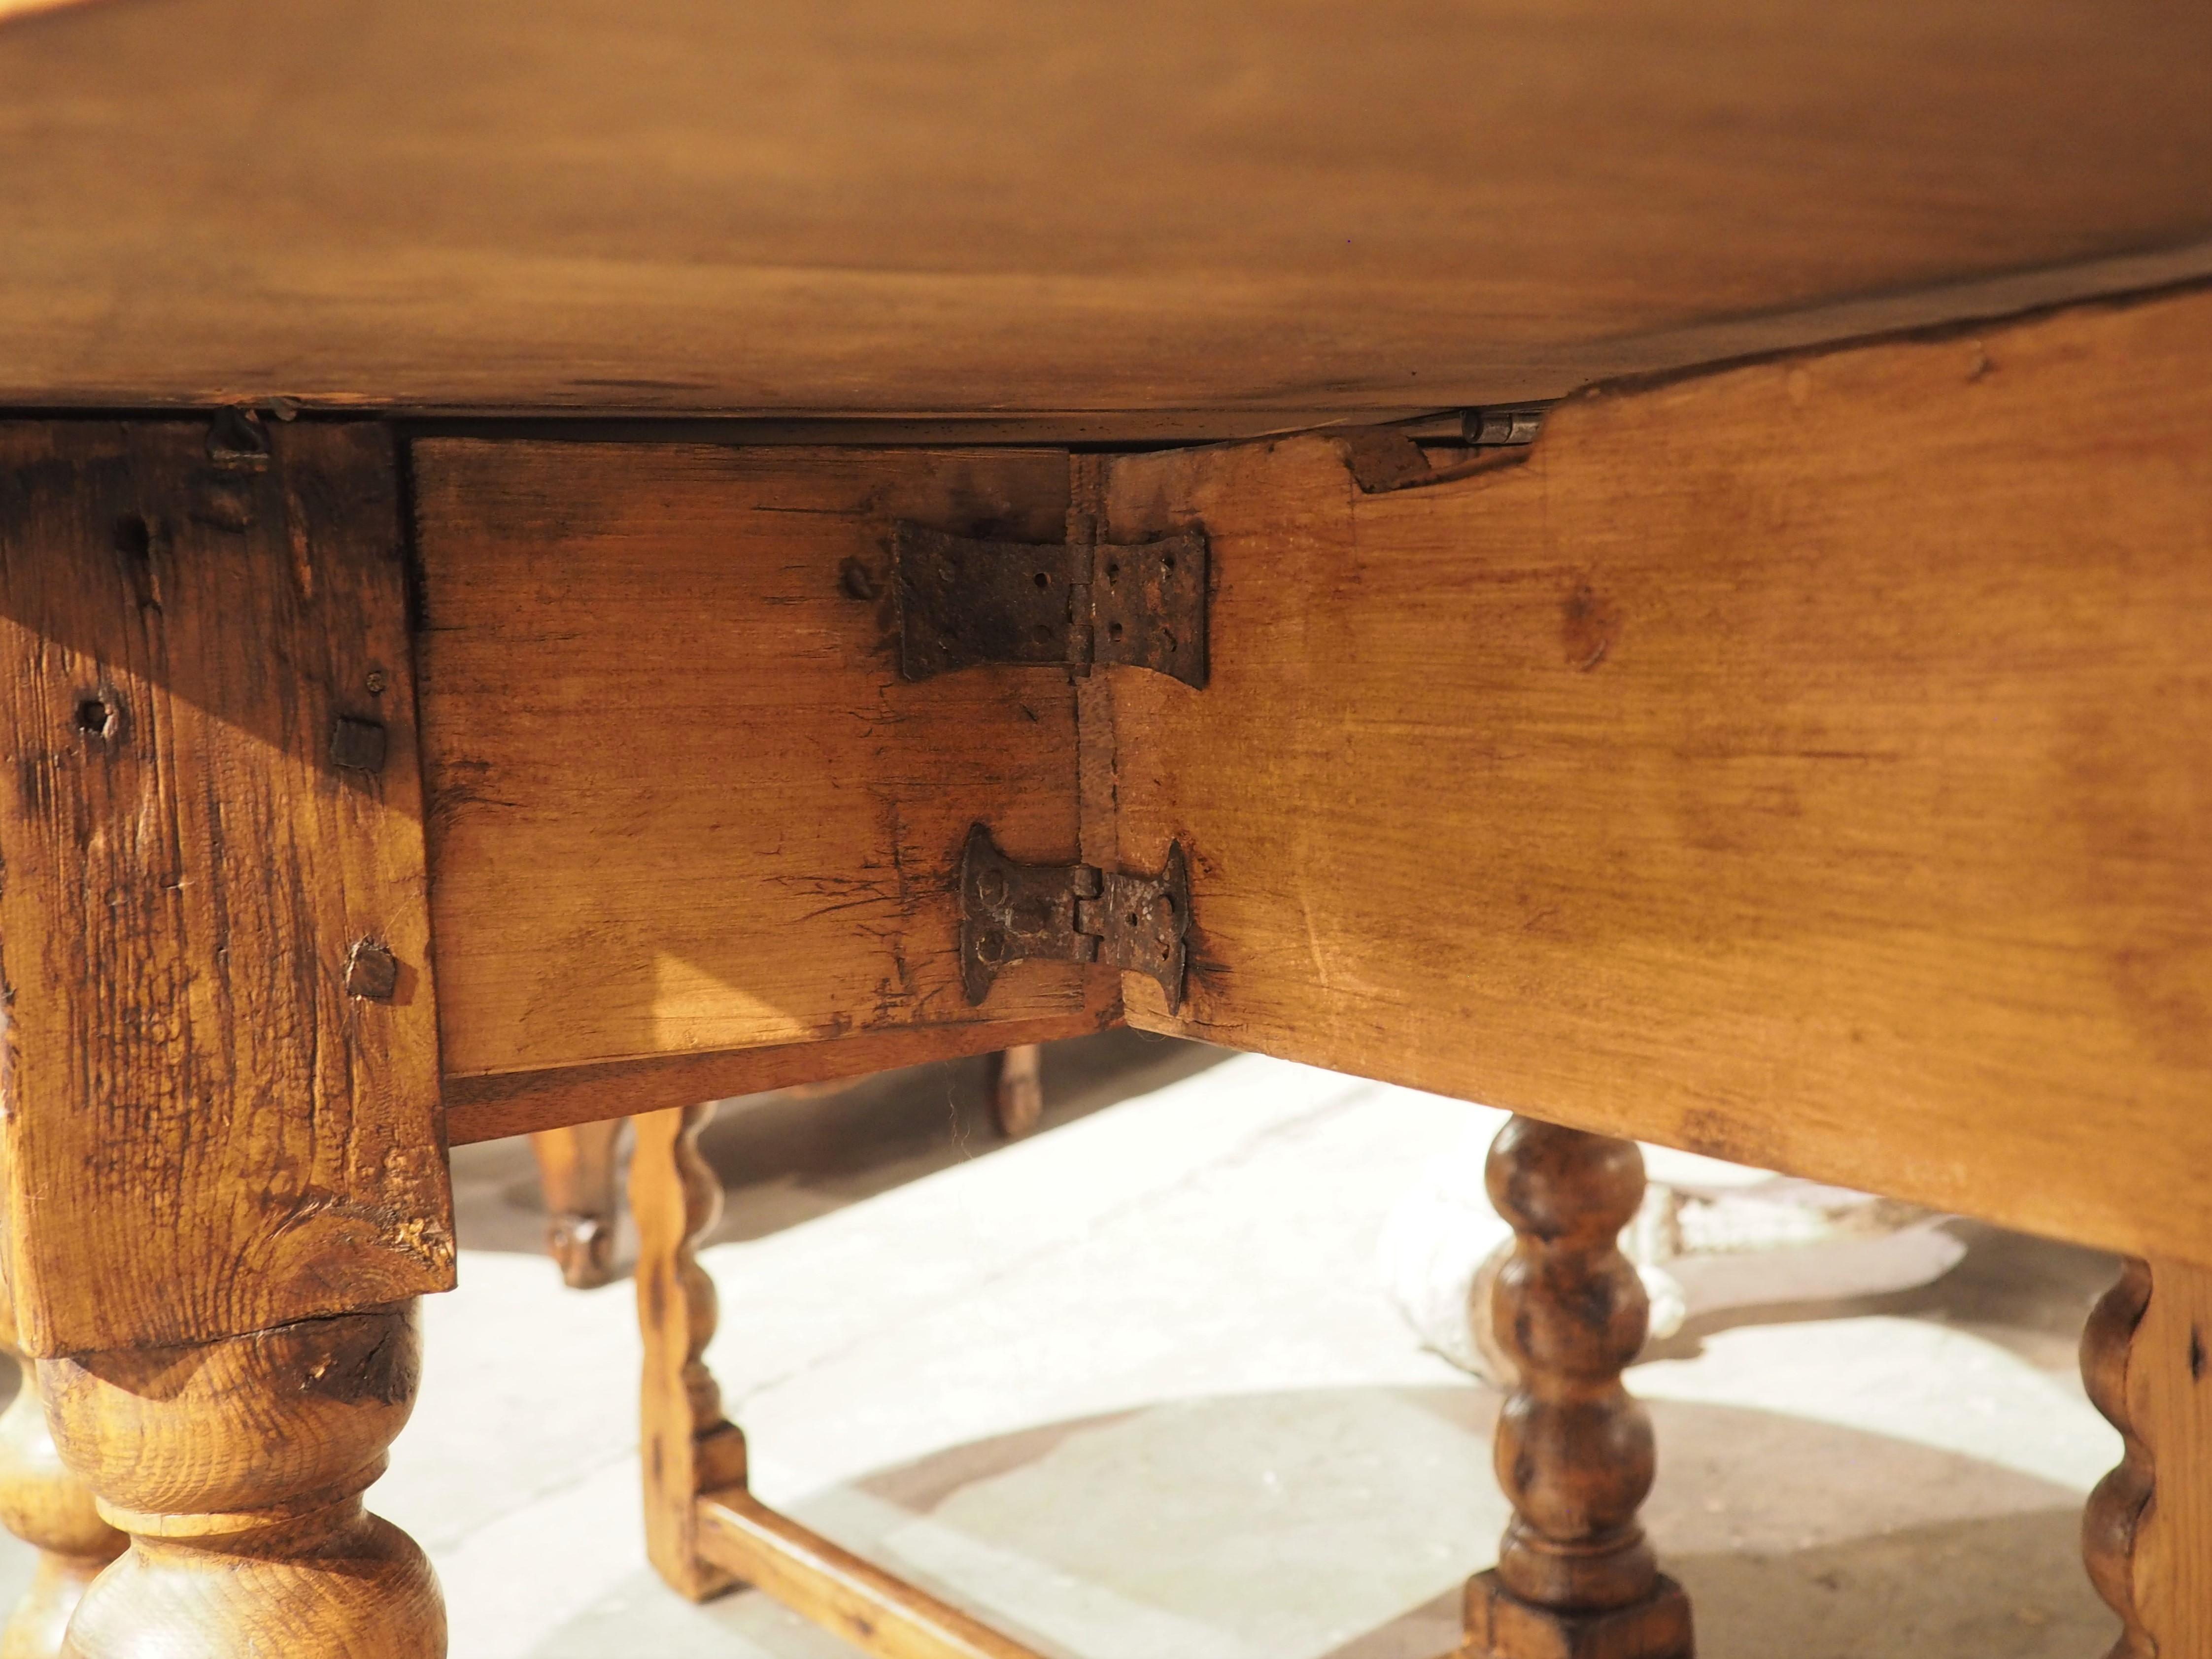 English 17th Century Oval Gate Leg Table from England